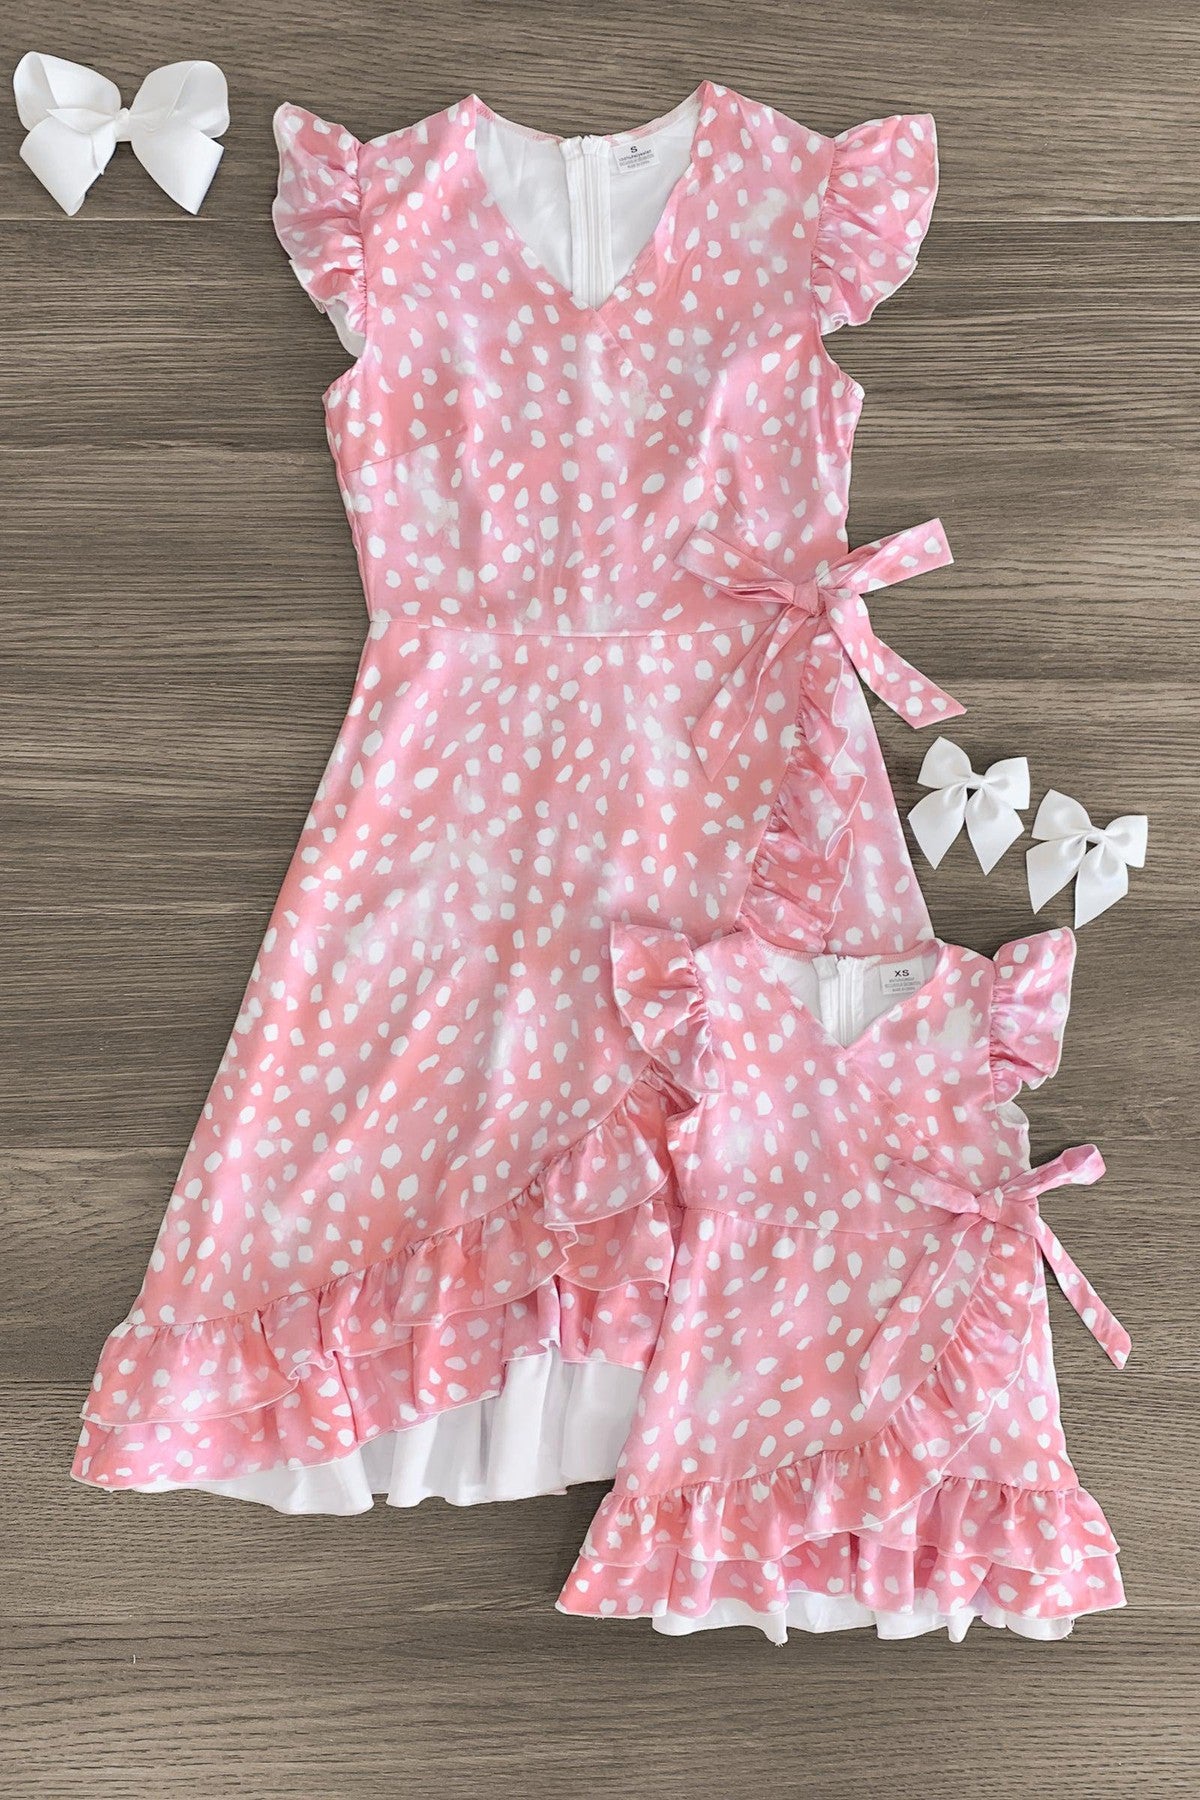 Mom & Me - Peachy Pink Ruffle Dress - Sparkle in Pink